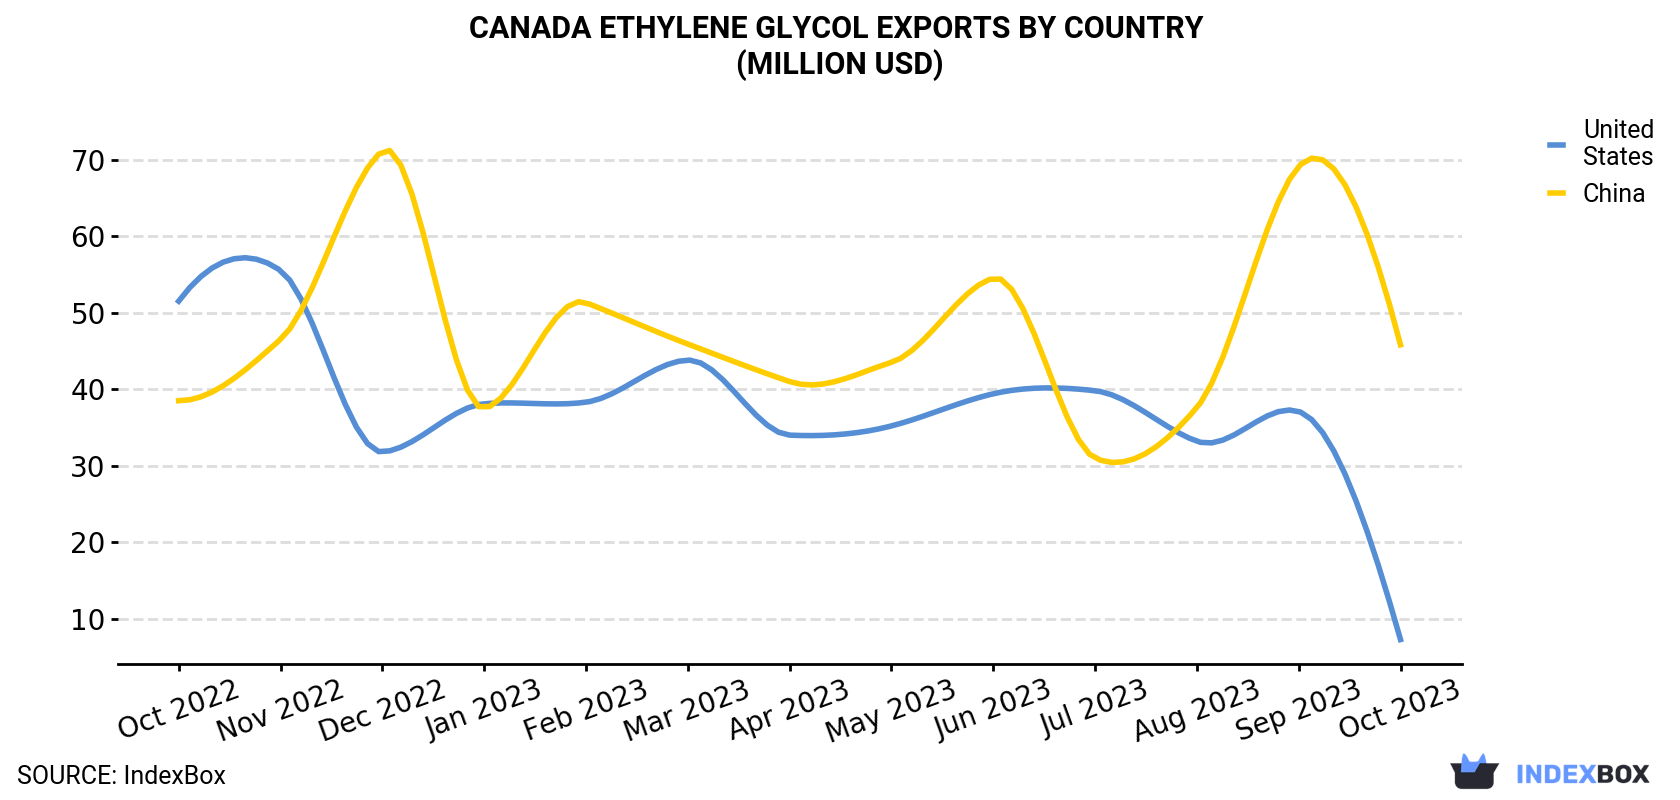 Canada Ethylene Glycol Exports By Country (Million USD)